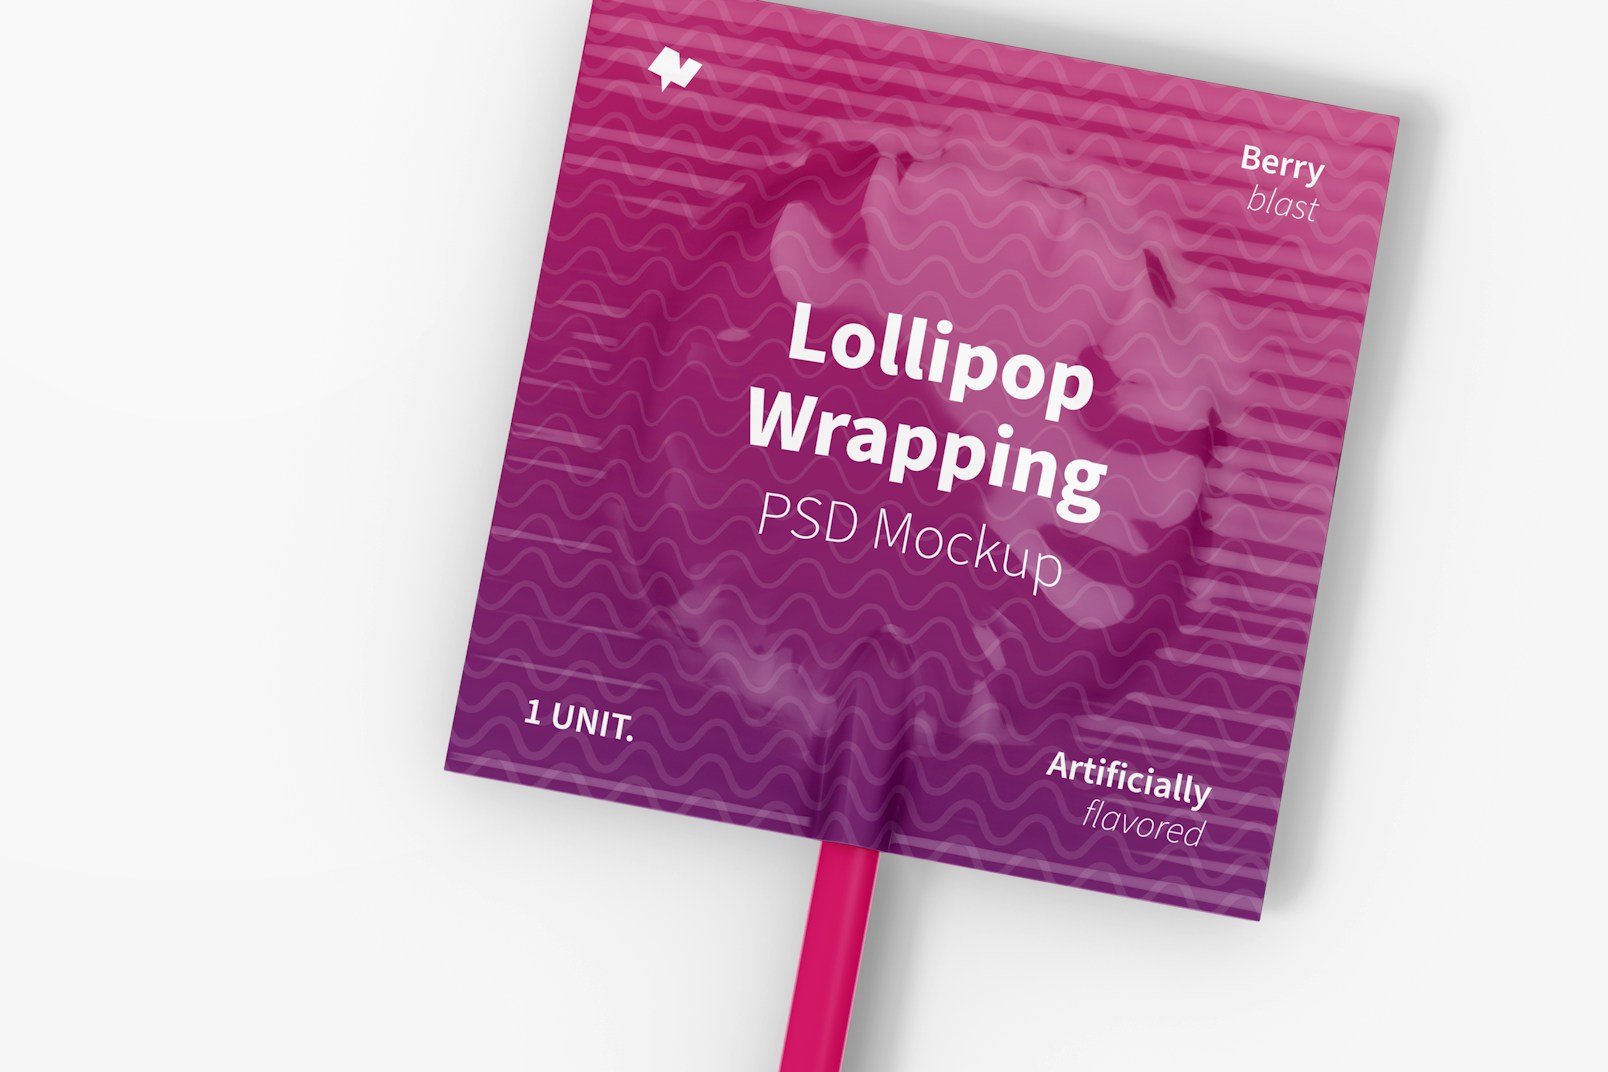 Lollipop Wrapping Mockup, Close Up